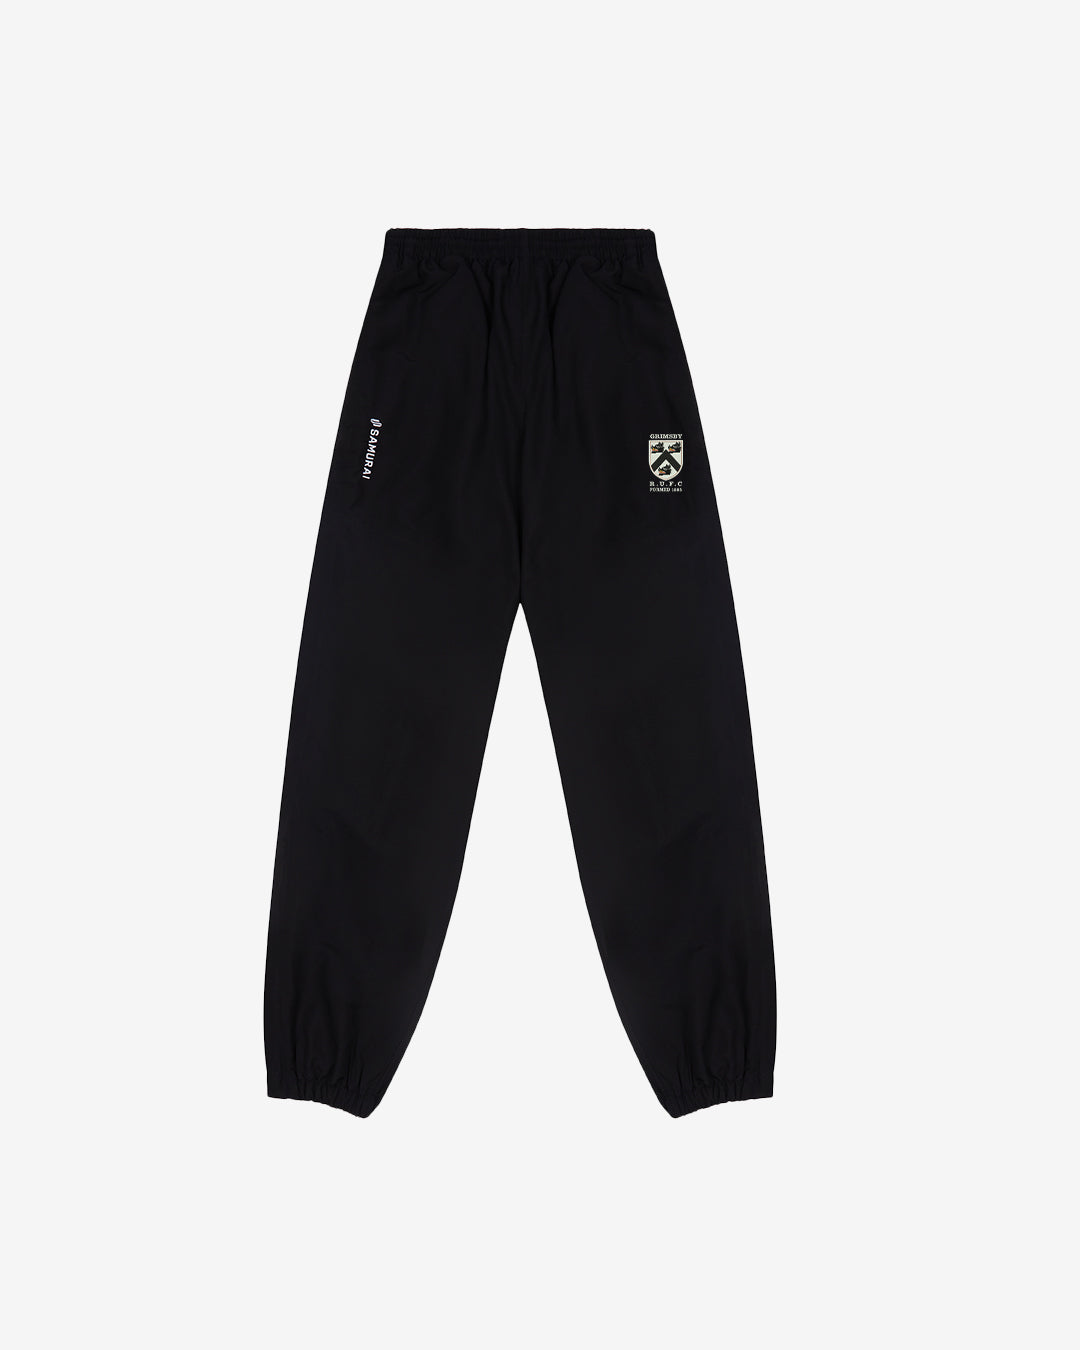 Grimsby RUFC - EP:0104 - Southland Track Pant 2.0 - Black